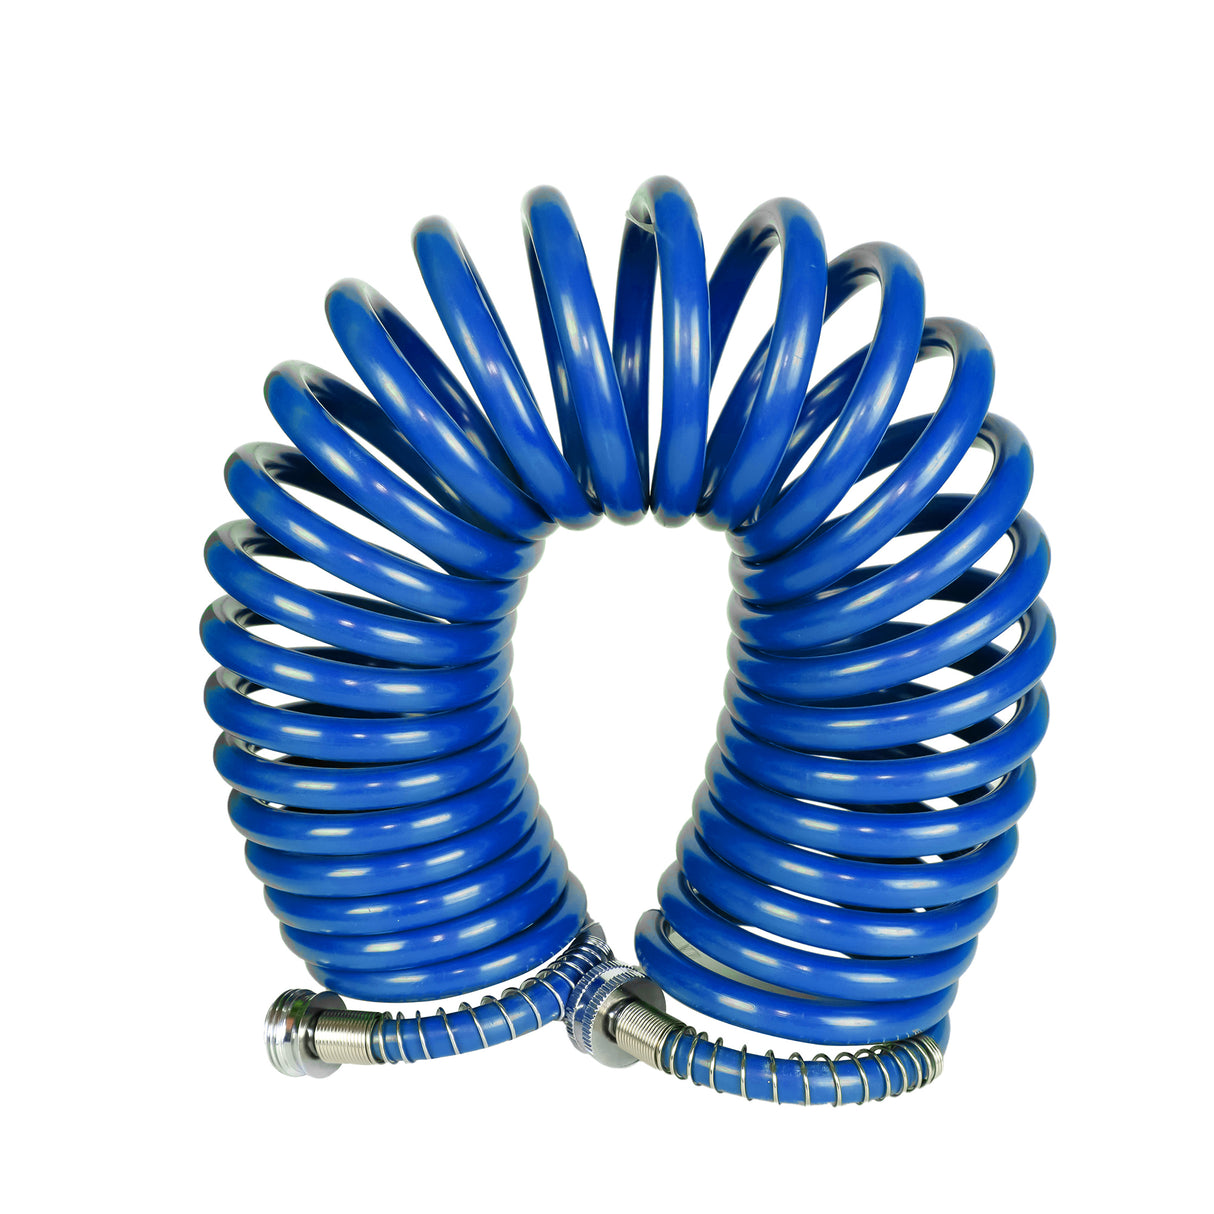 Avagard Recoil Water Hose 3/8" X 25'